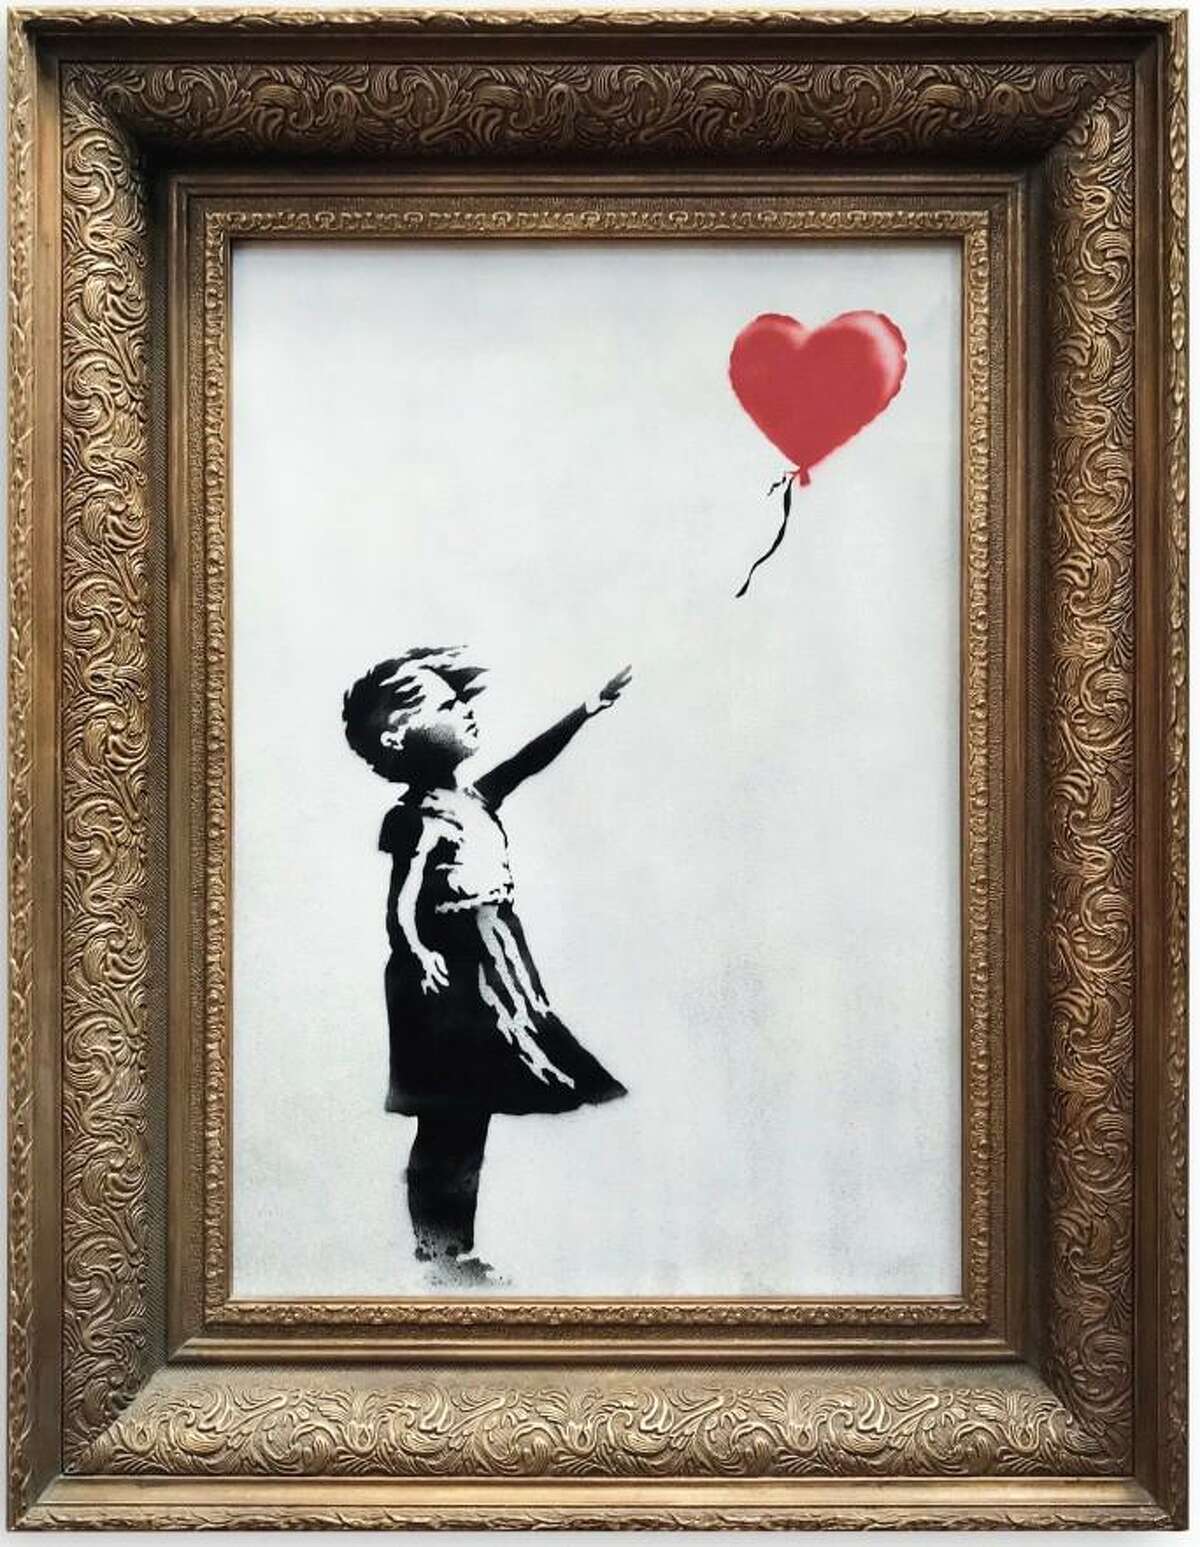 A Connecticut artist recreated this well-known Banksy painting at Women's March in New York City on Jan. 19, 2019.